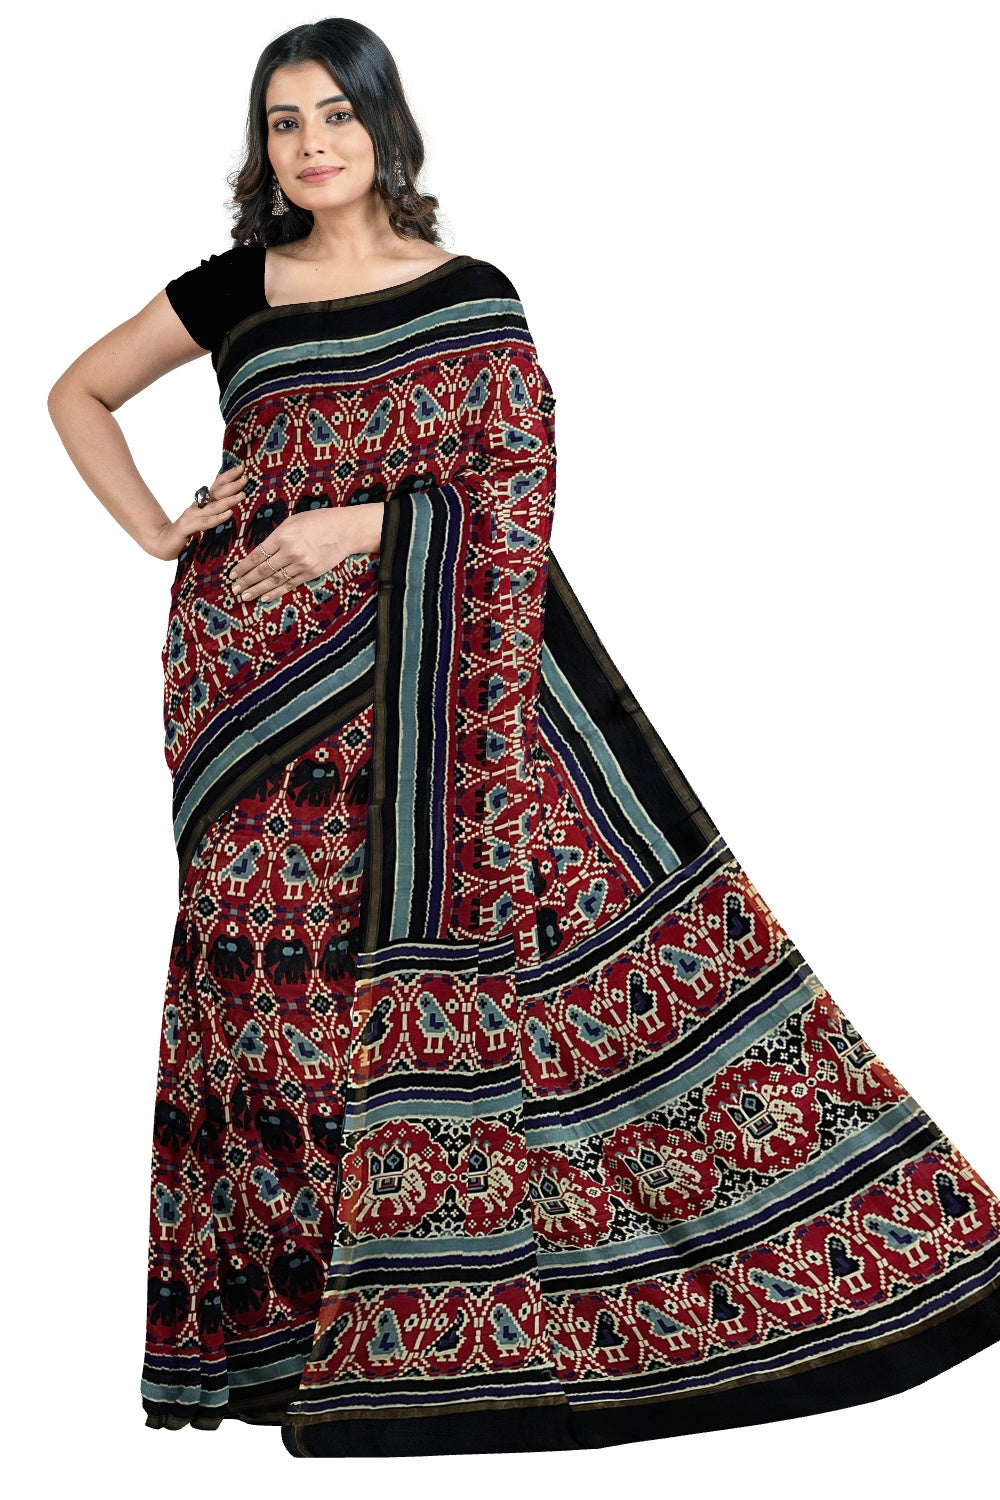 Southloom Cotton Red and Black Designer Printed Saree